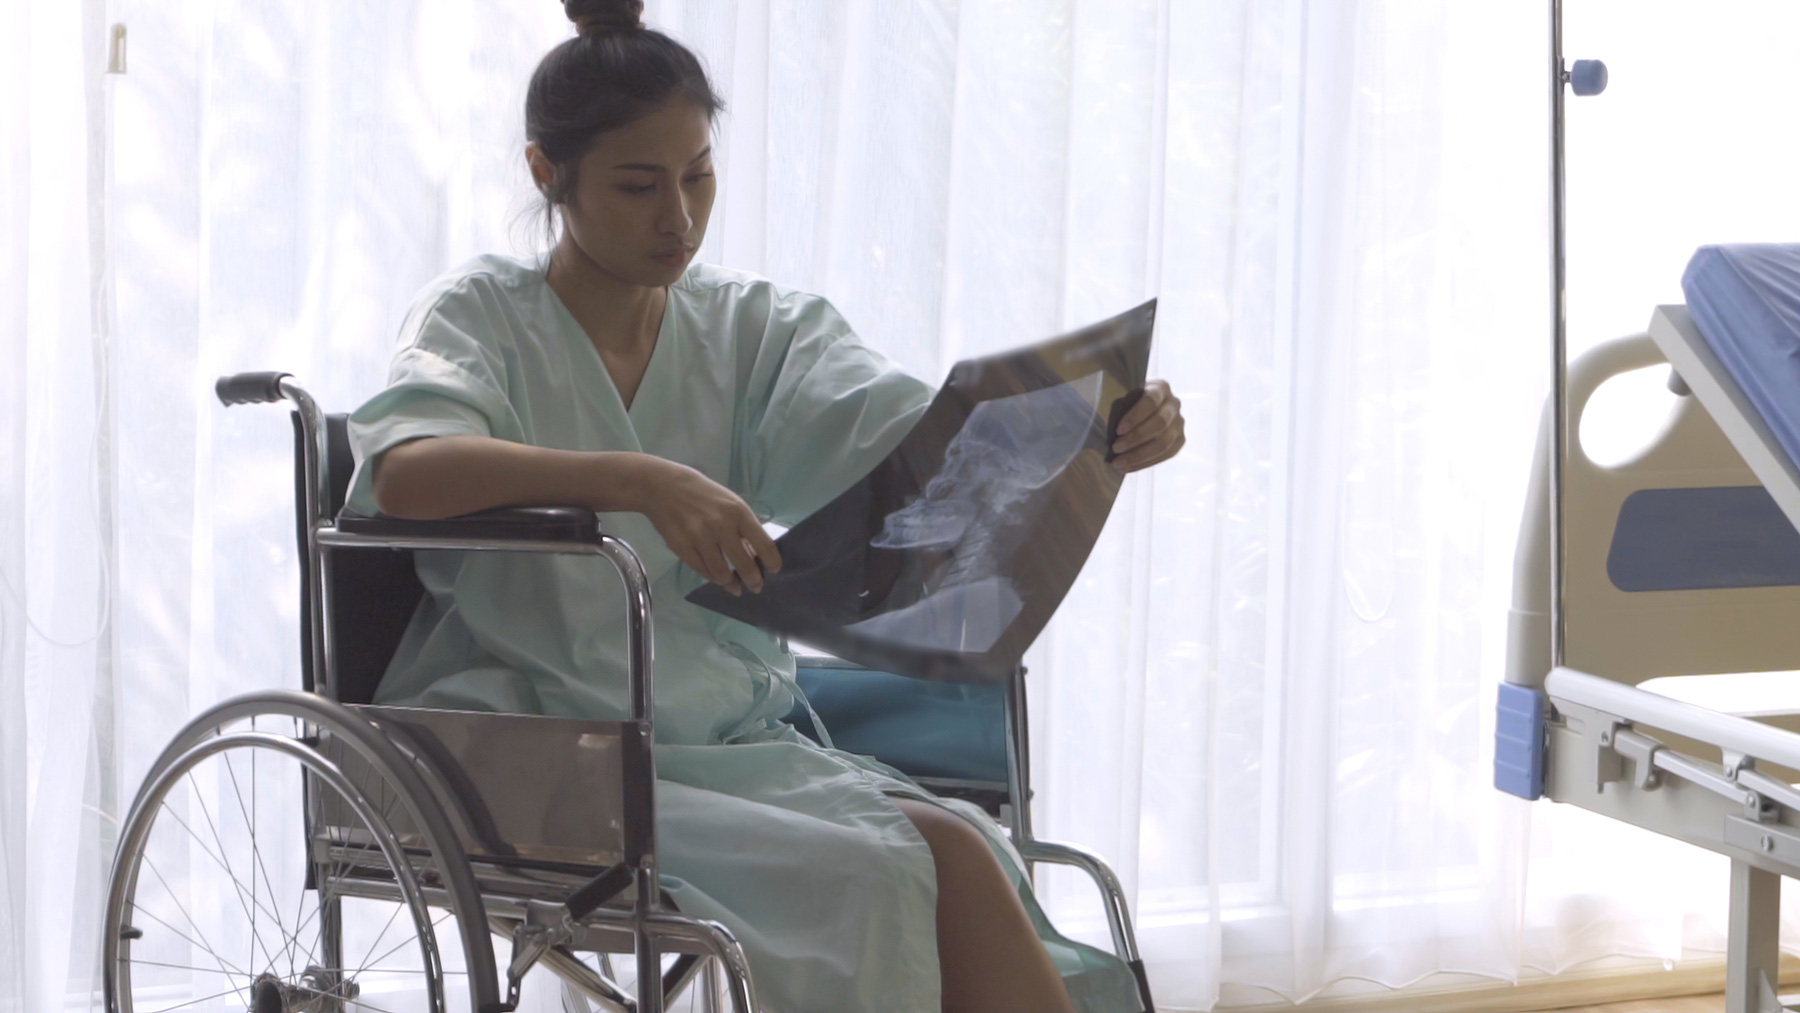 Woman sitting in a wheelchair examining X-rays after an accident